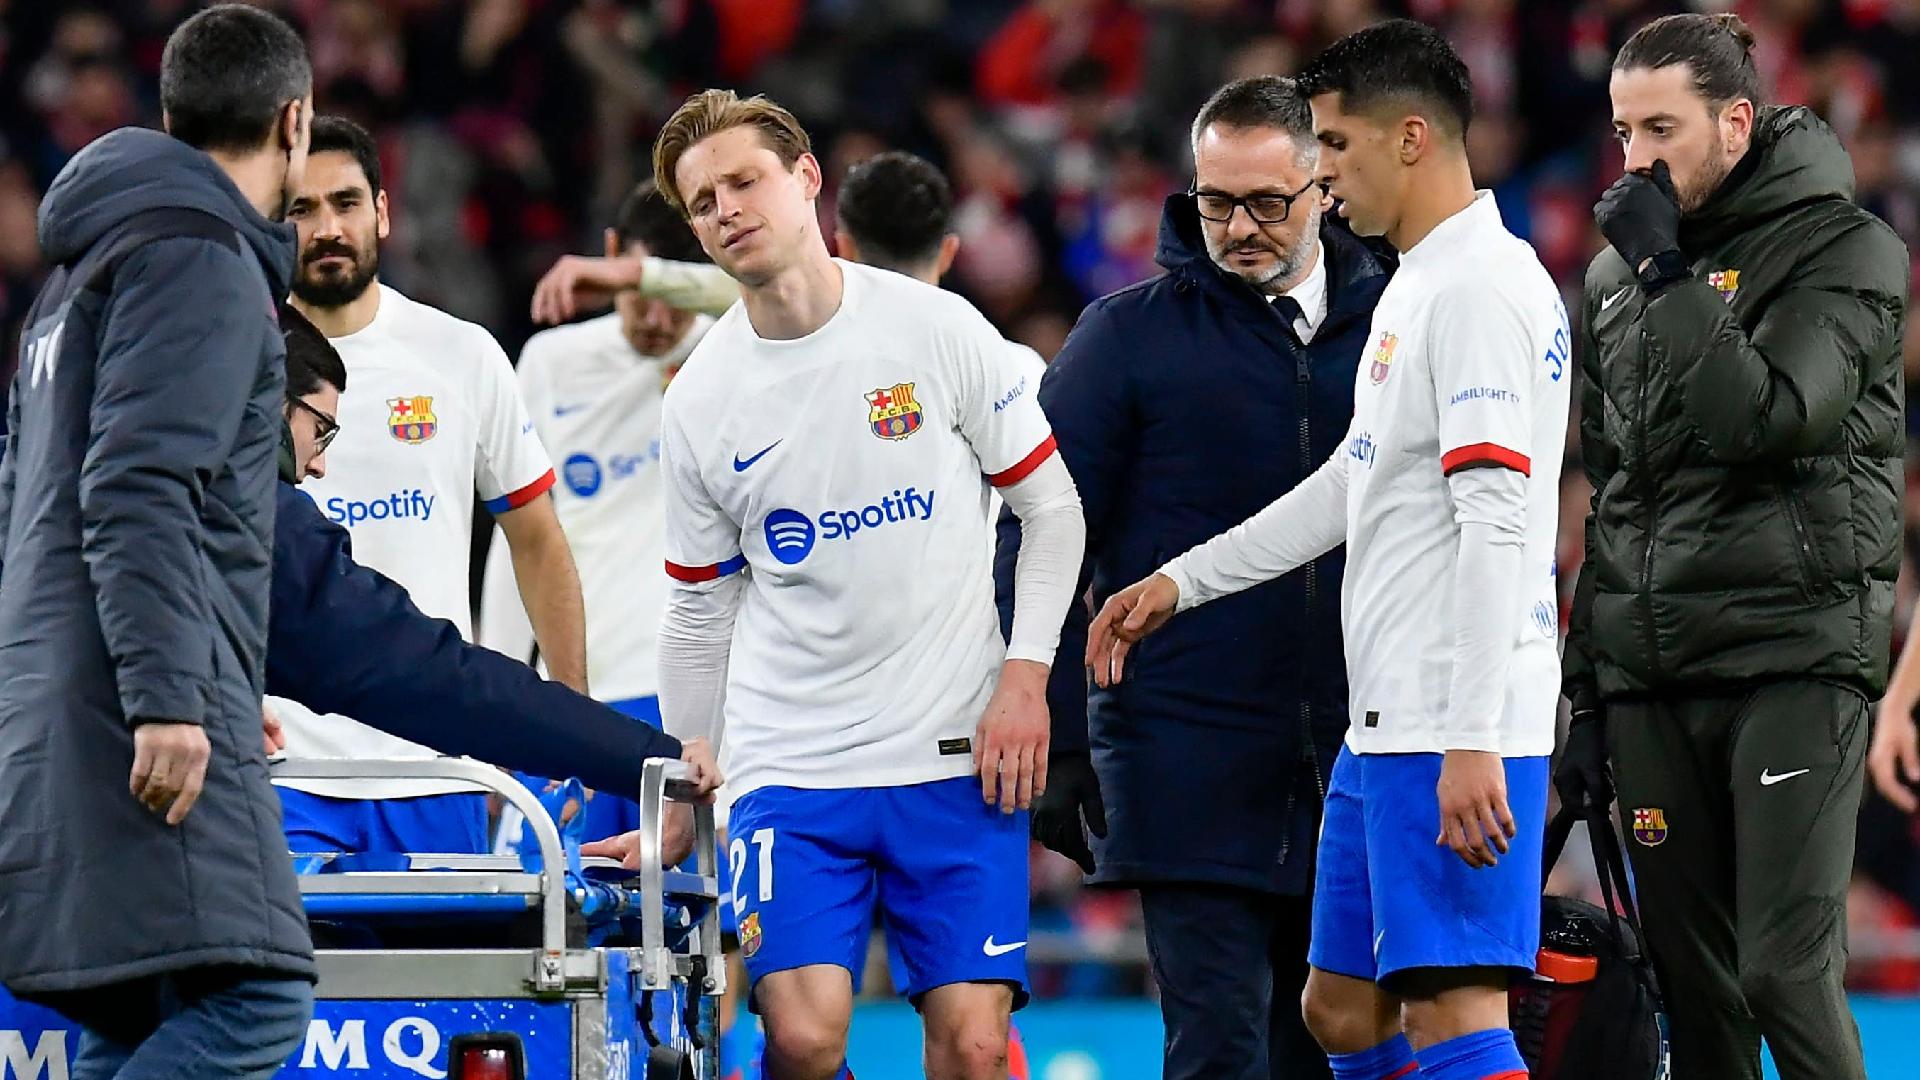 Frenkie de Jong and Pedri set for spells on sidelines with injuries